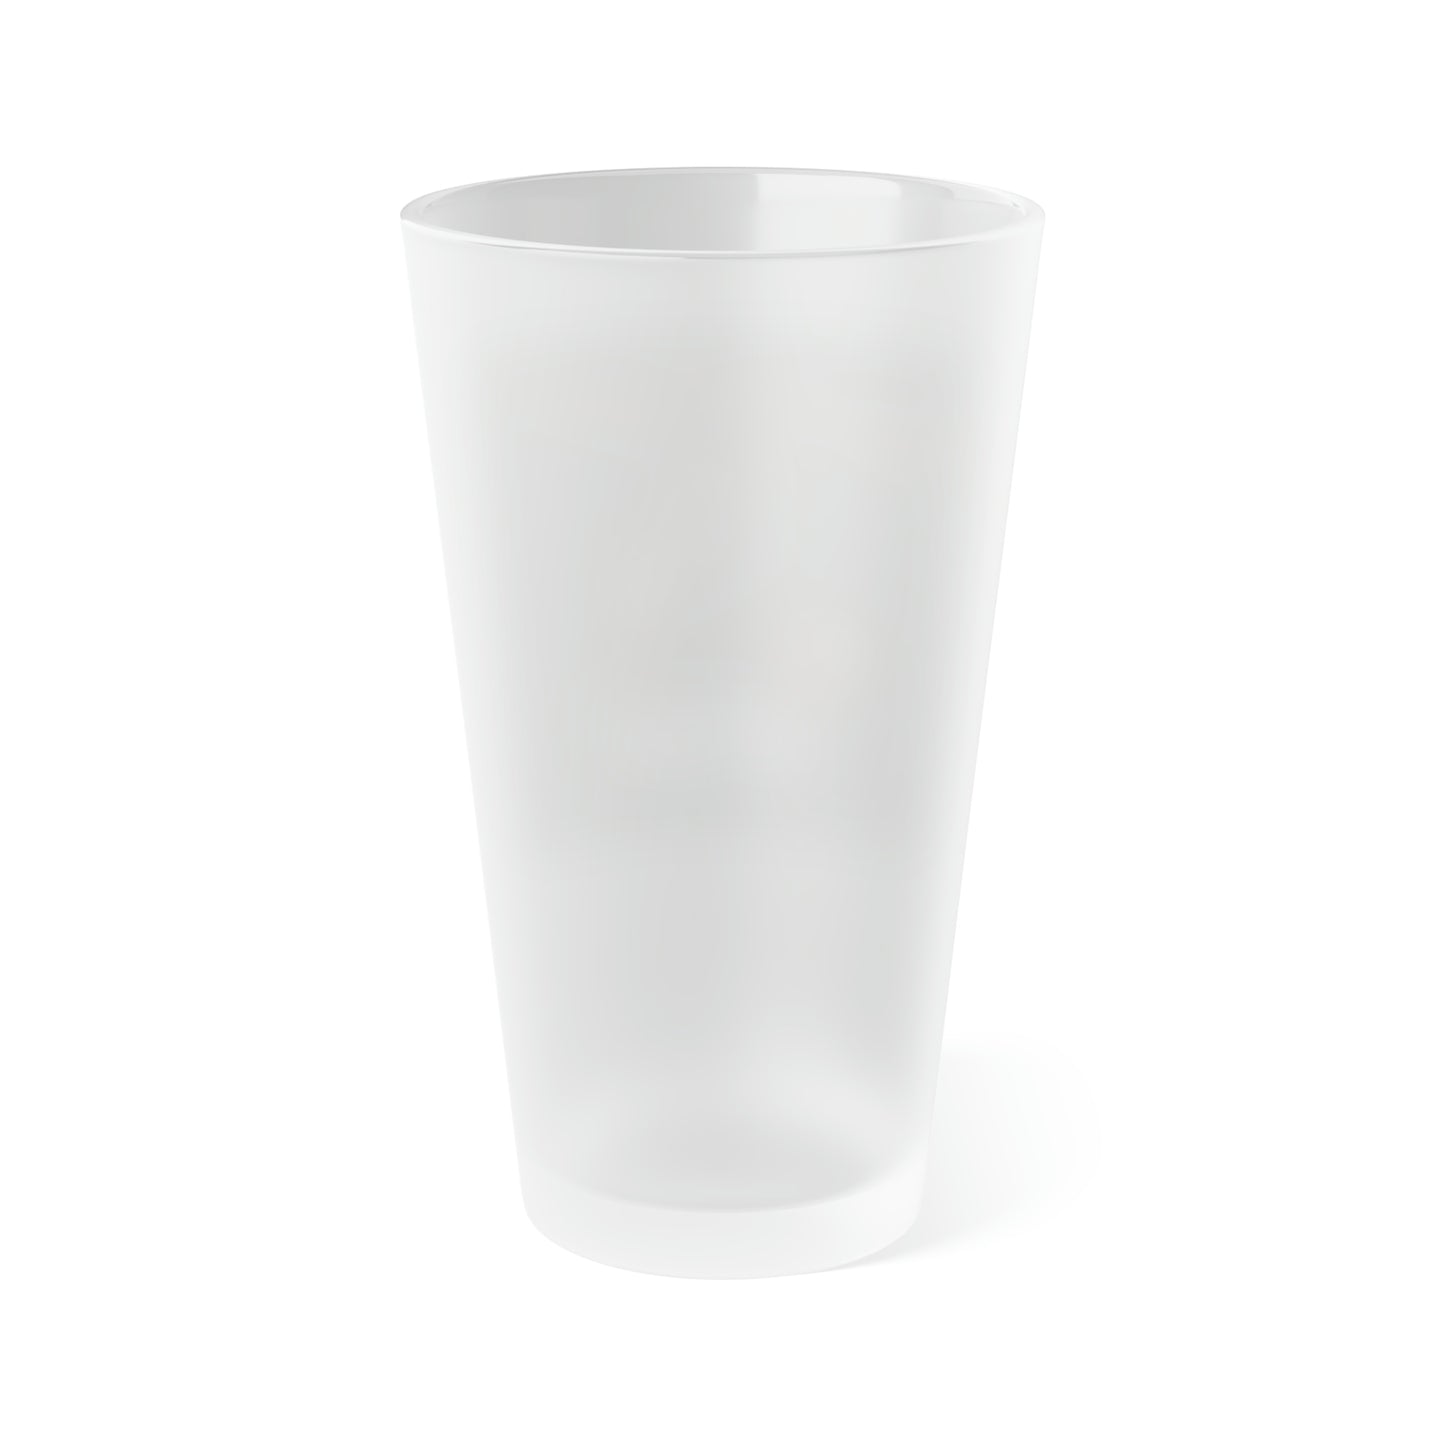 Premium Crap Frosted Pint Glass